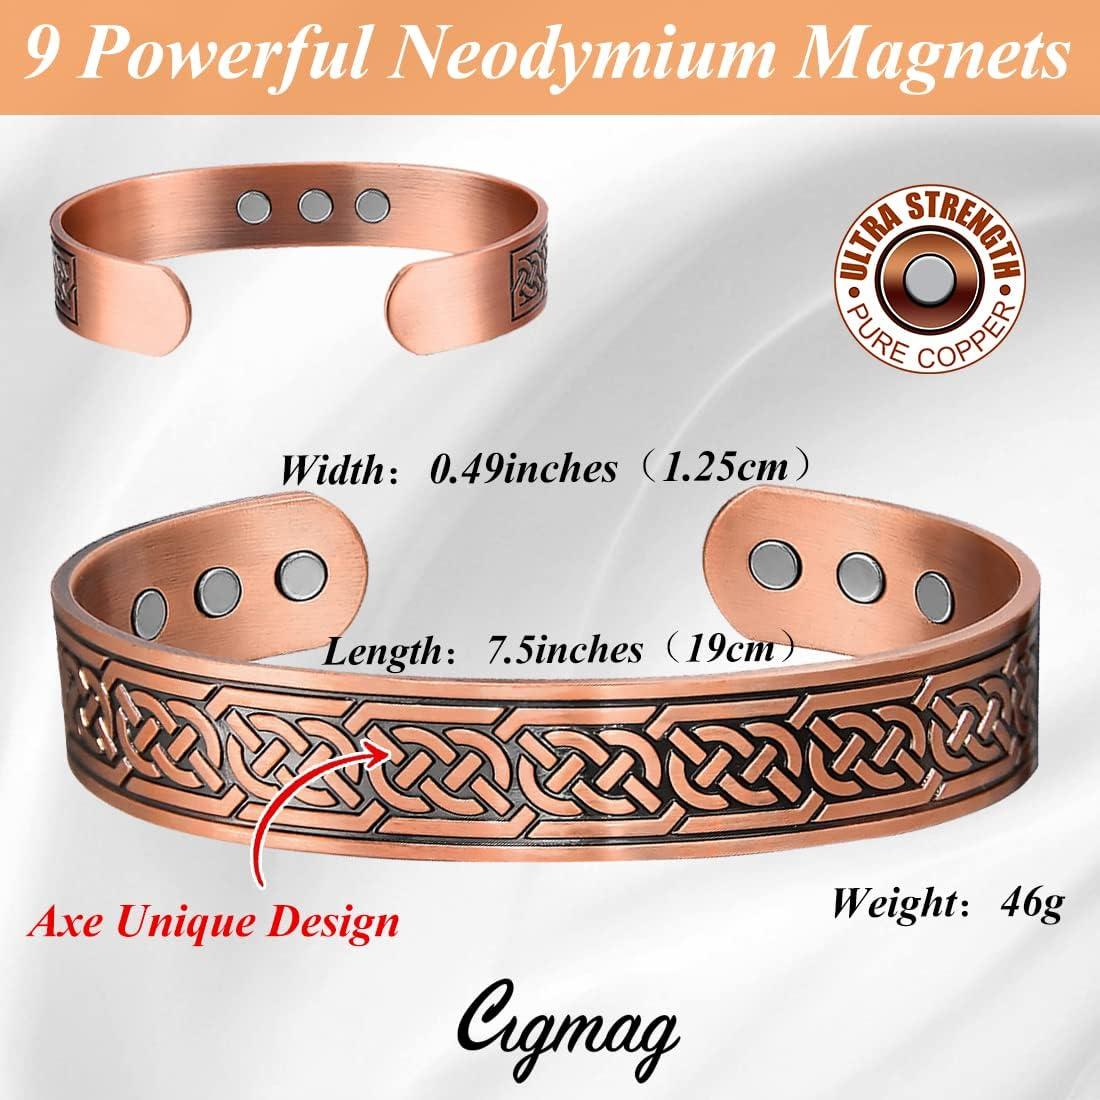  Cigmag Copper Necklace for Men Women - Magnetic Necklace 99%  Solid Pure Copper Ring Set Ultra Strength Magnets - Copper Chain Necklace  with Adjustable Sizing Tool and Gifts Box for Anniversary 